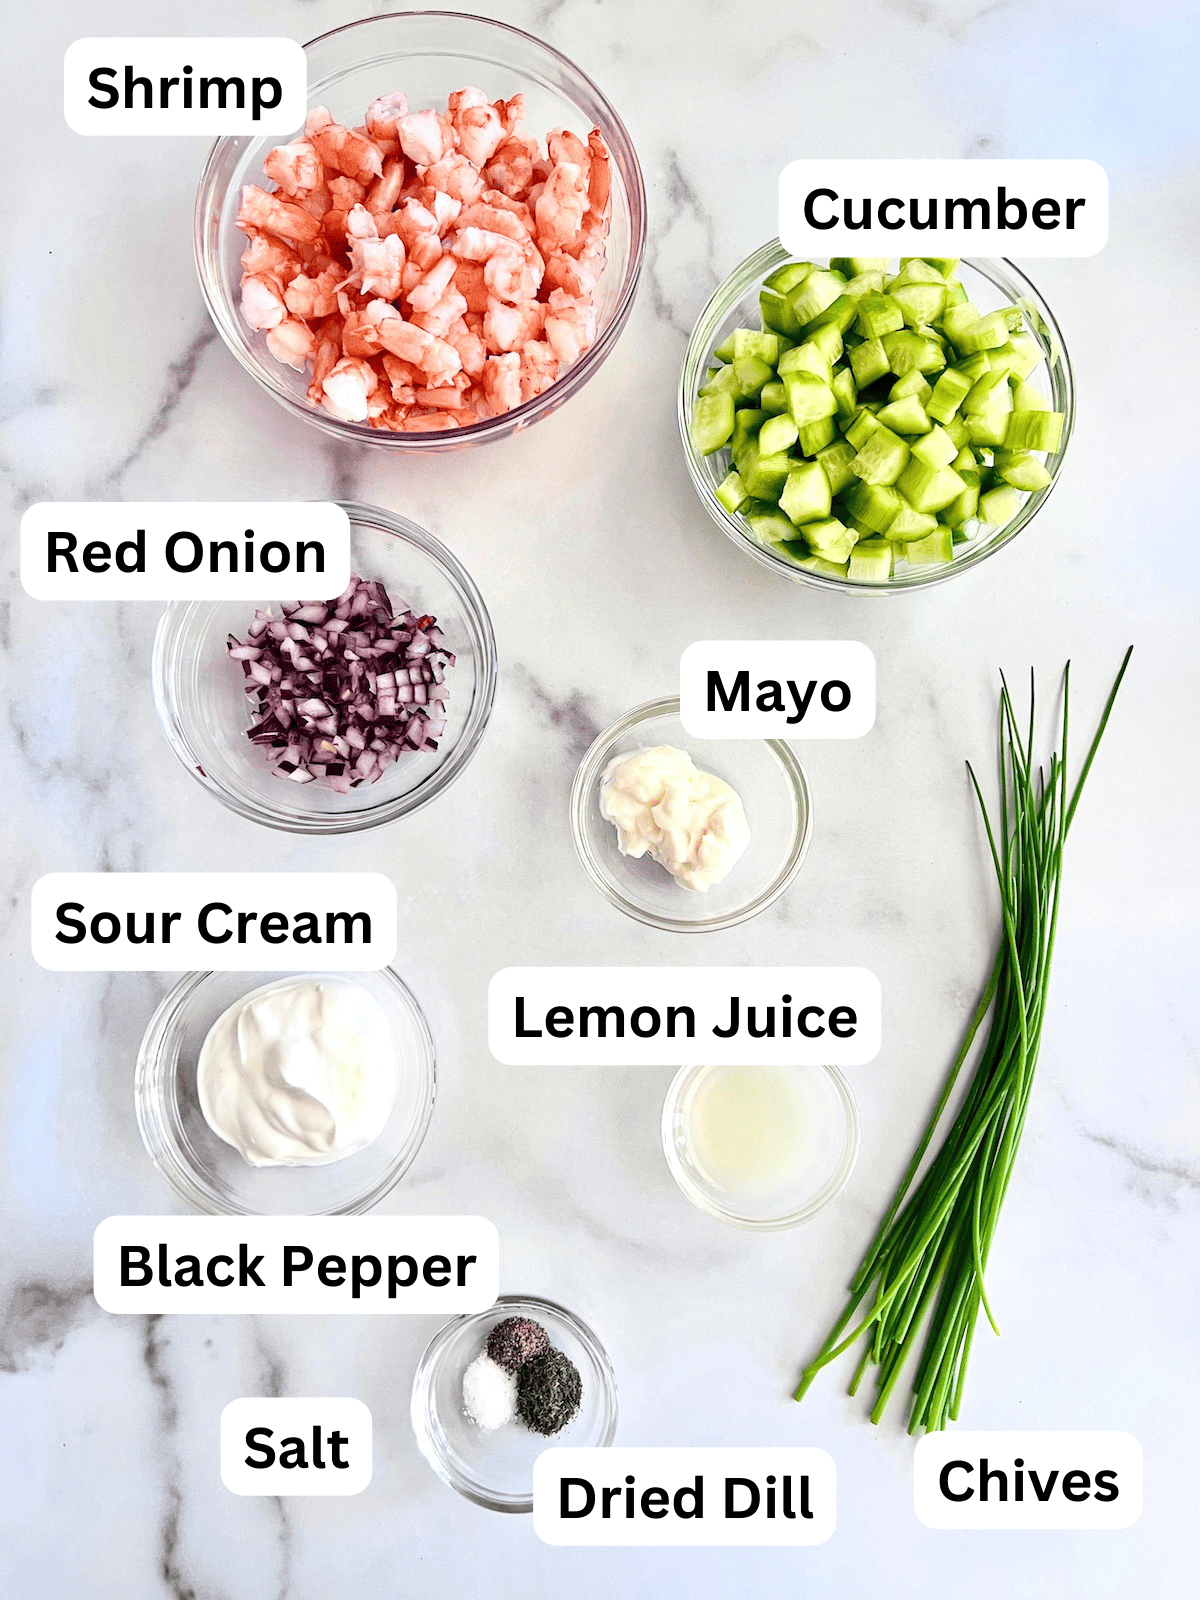 Cucumber Shrimp Salad Ingredients in bowls on a table.